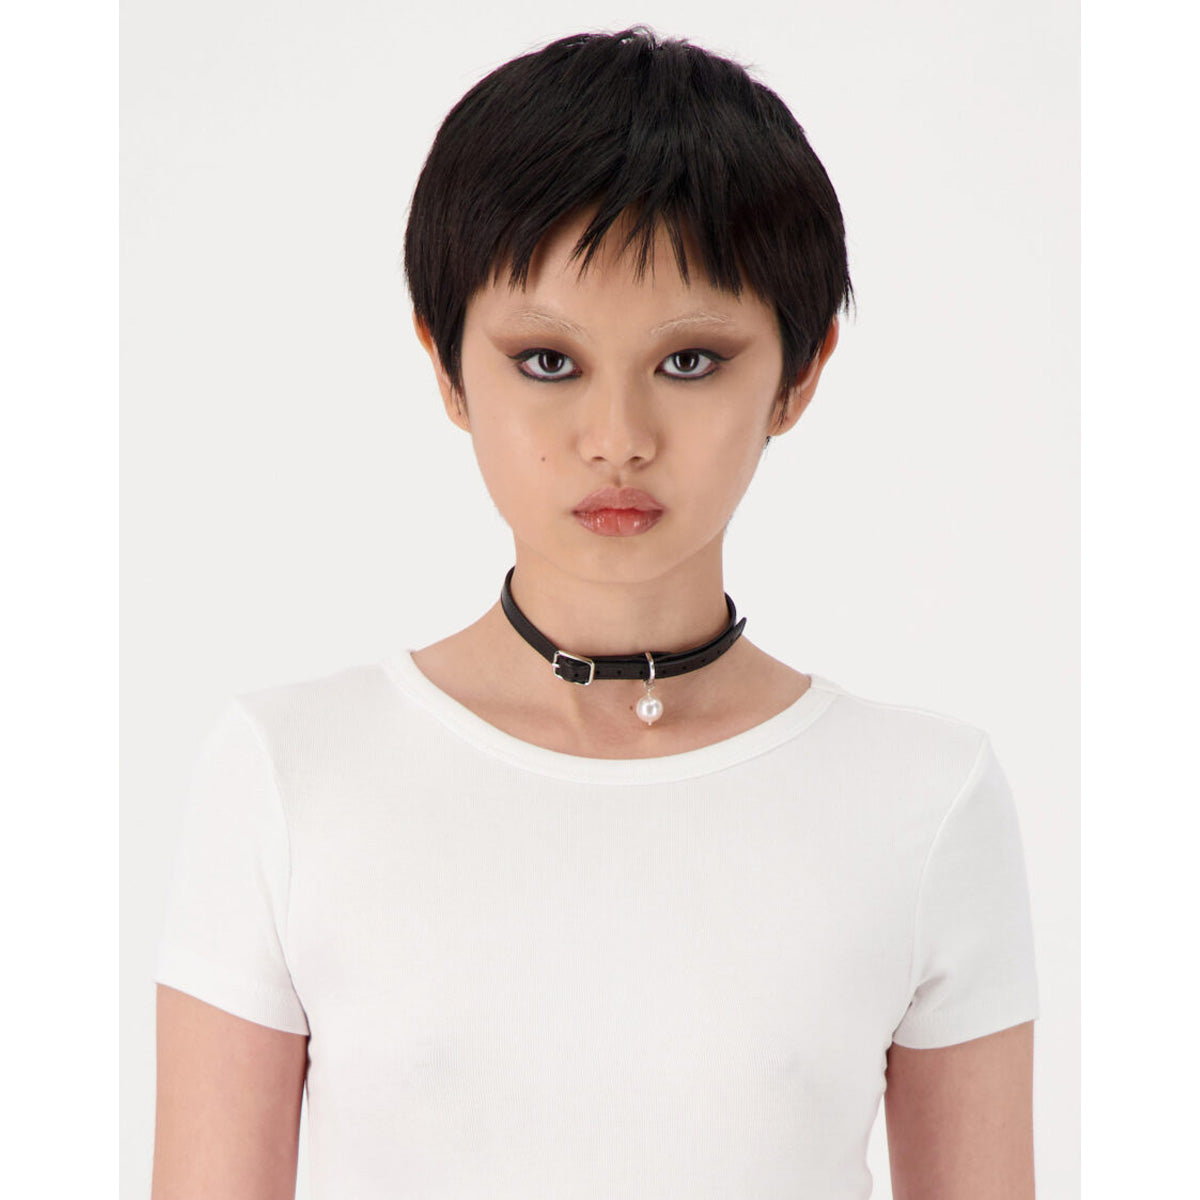 Justine Clenquet Pearl Leather Choker